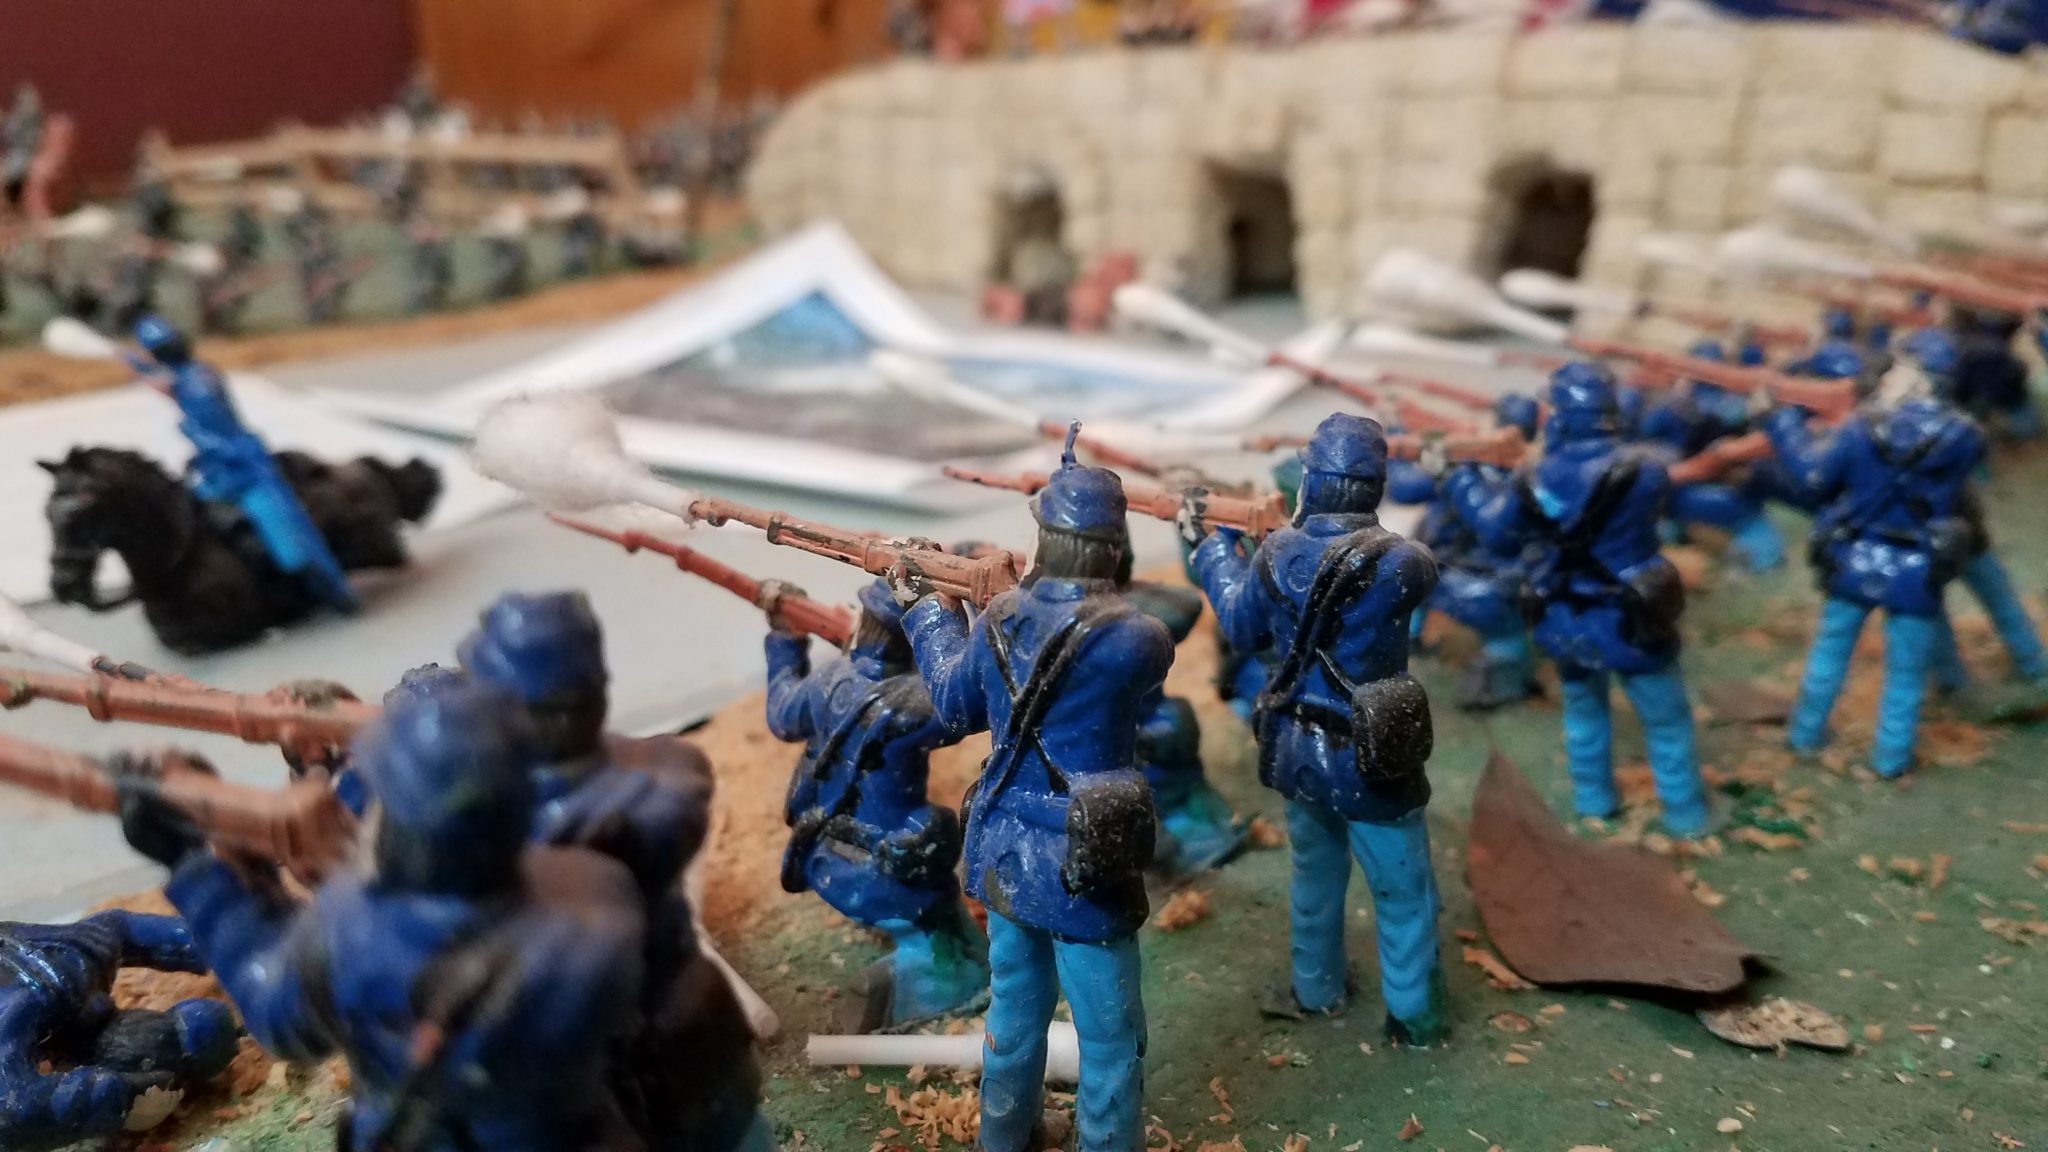 Toy Union soldiers